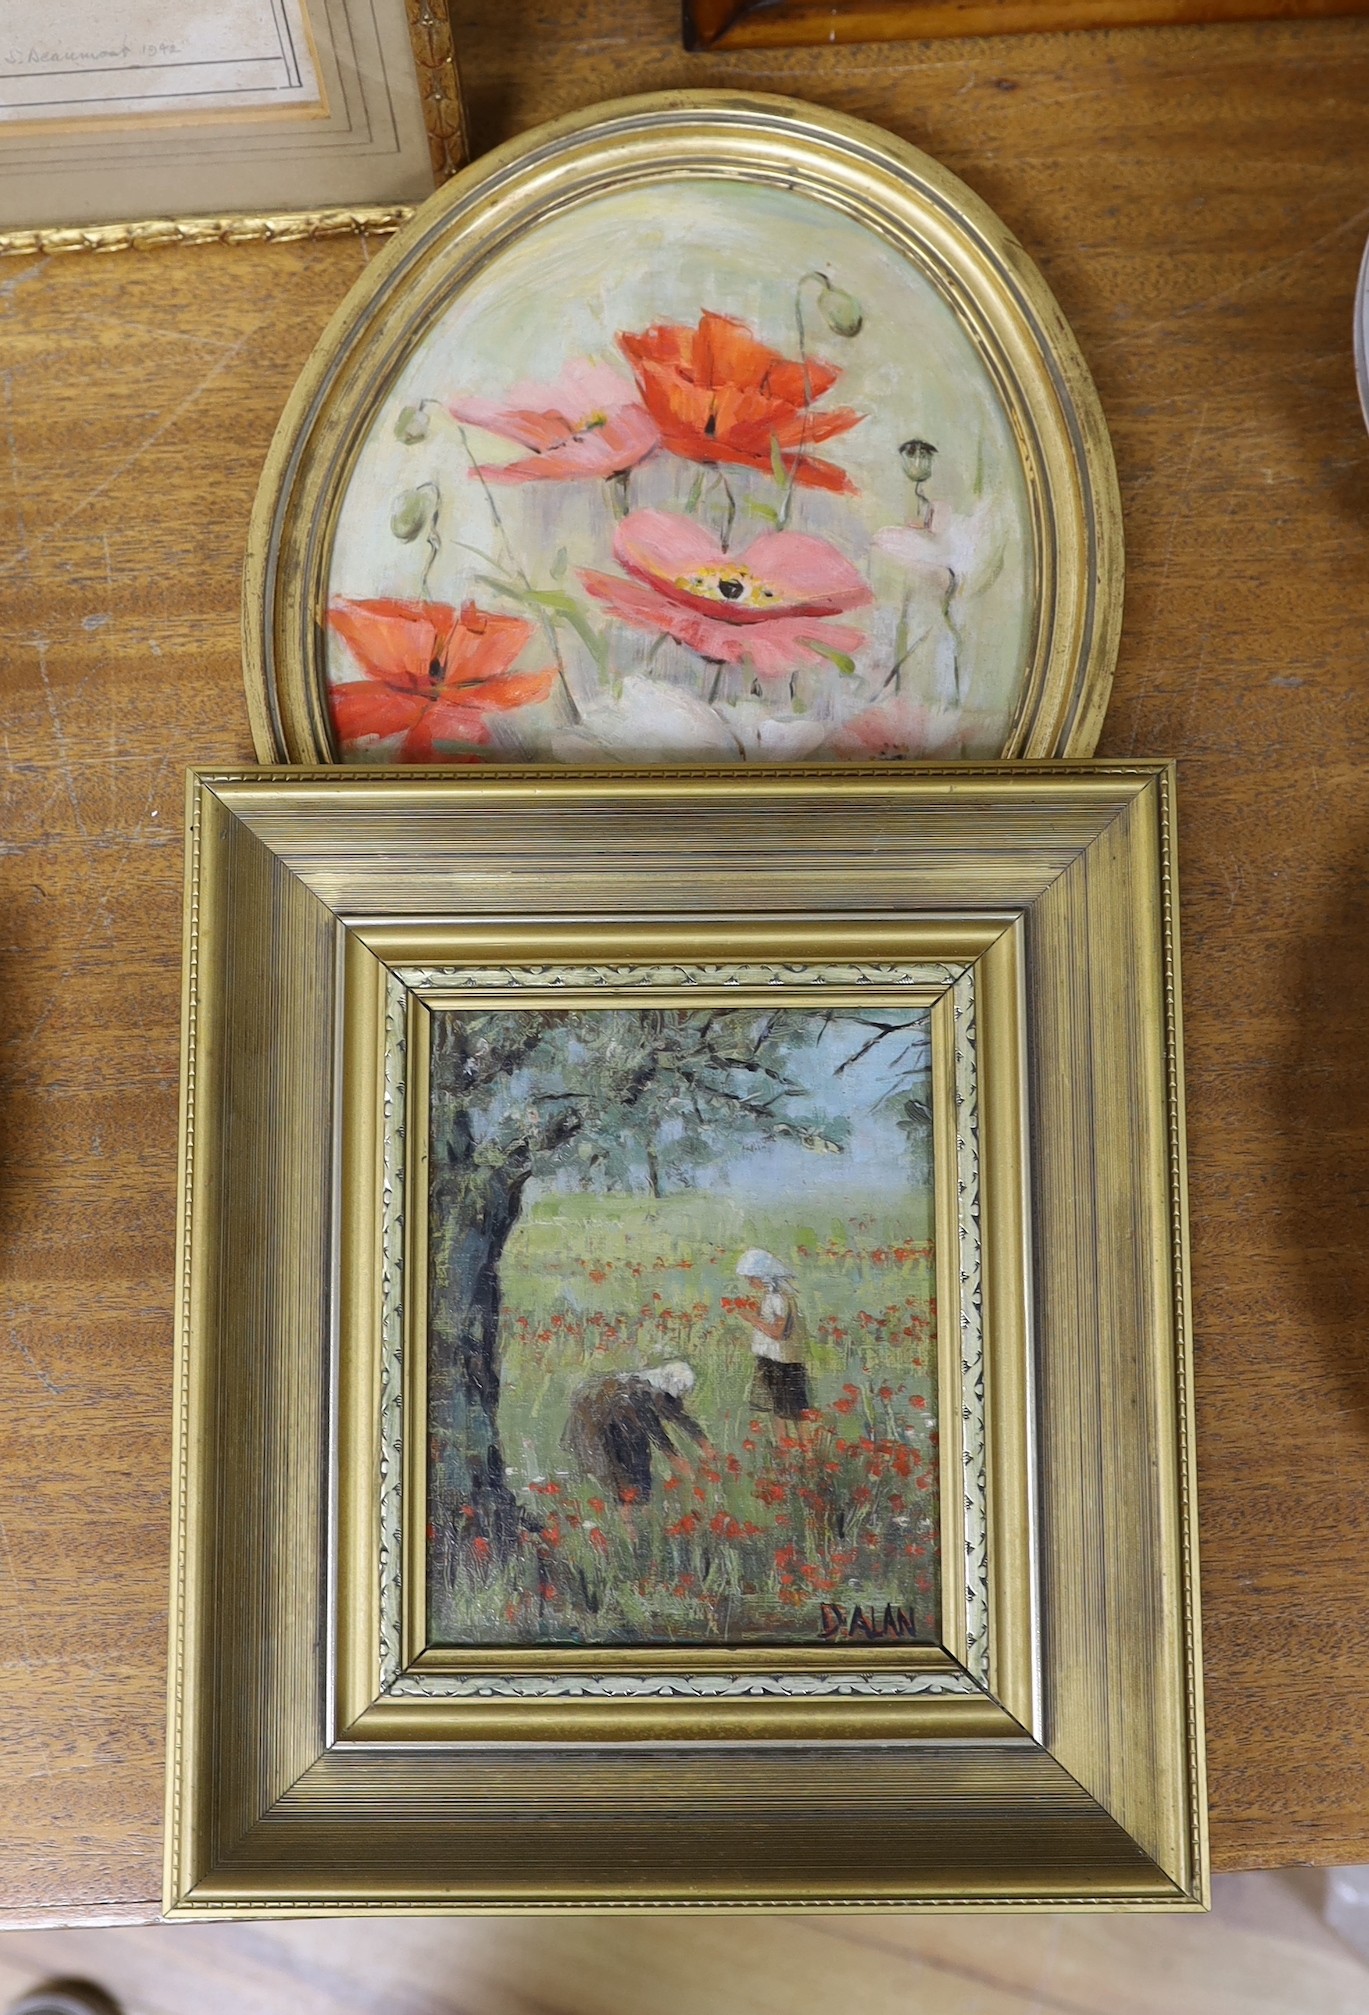 Doreen Allen, 20th century, two oils on board, ‘Spring in Greece’ and ‘Shirley Poppies’, both signed, largest 28 x 23cm